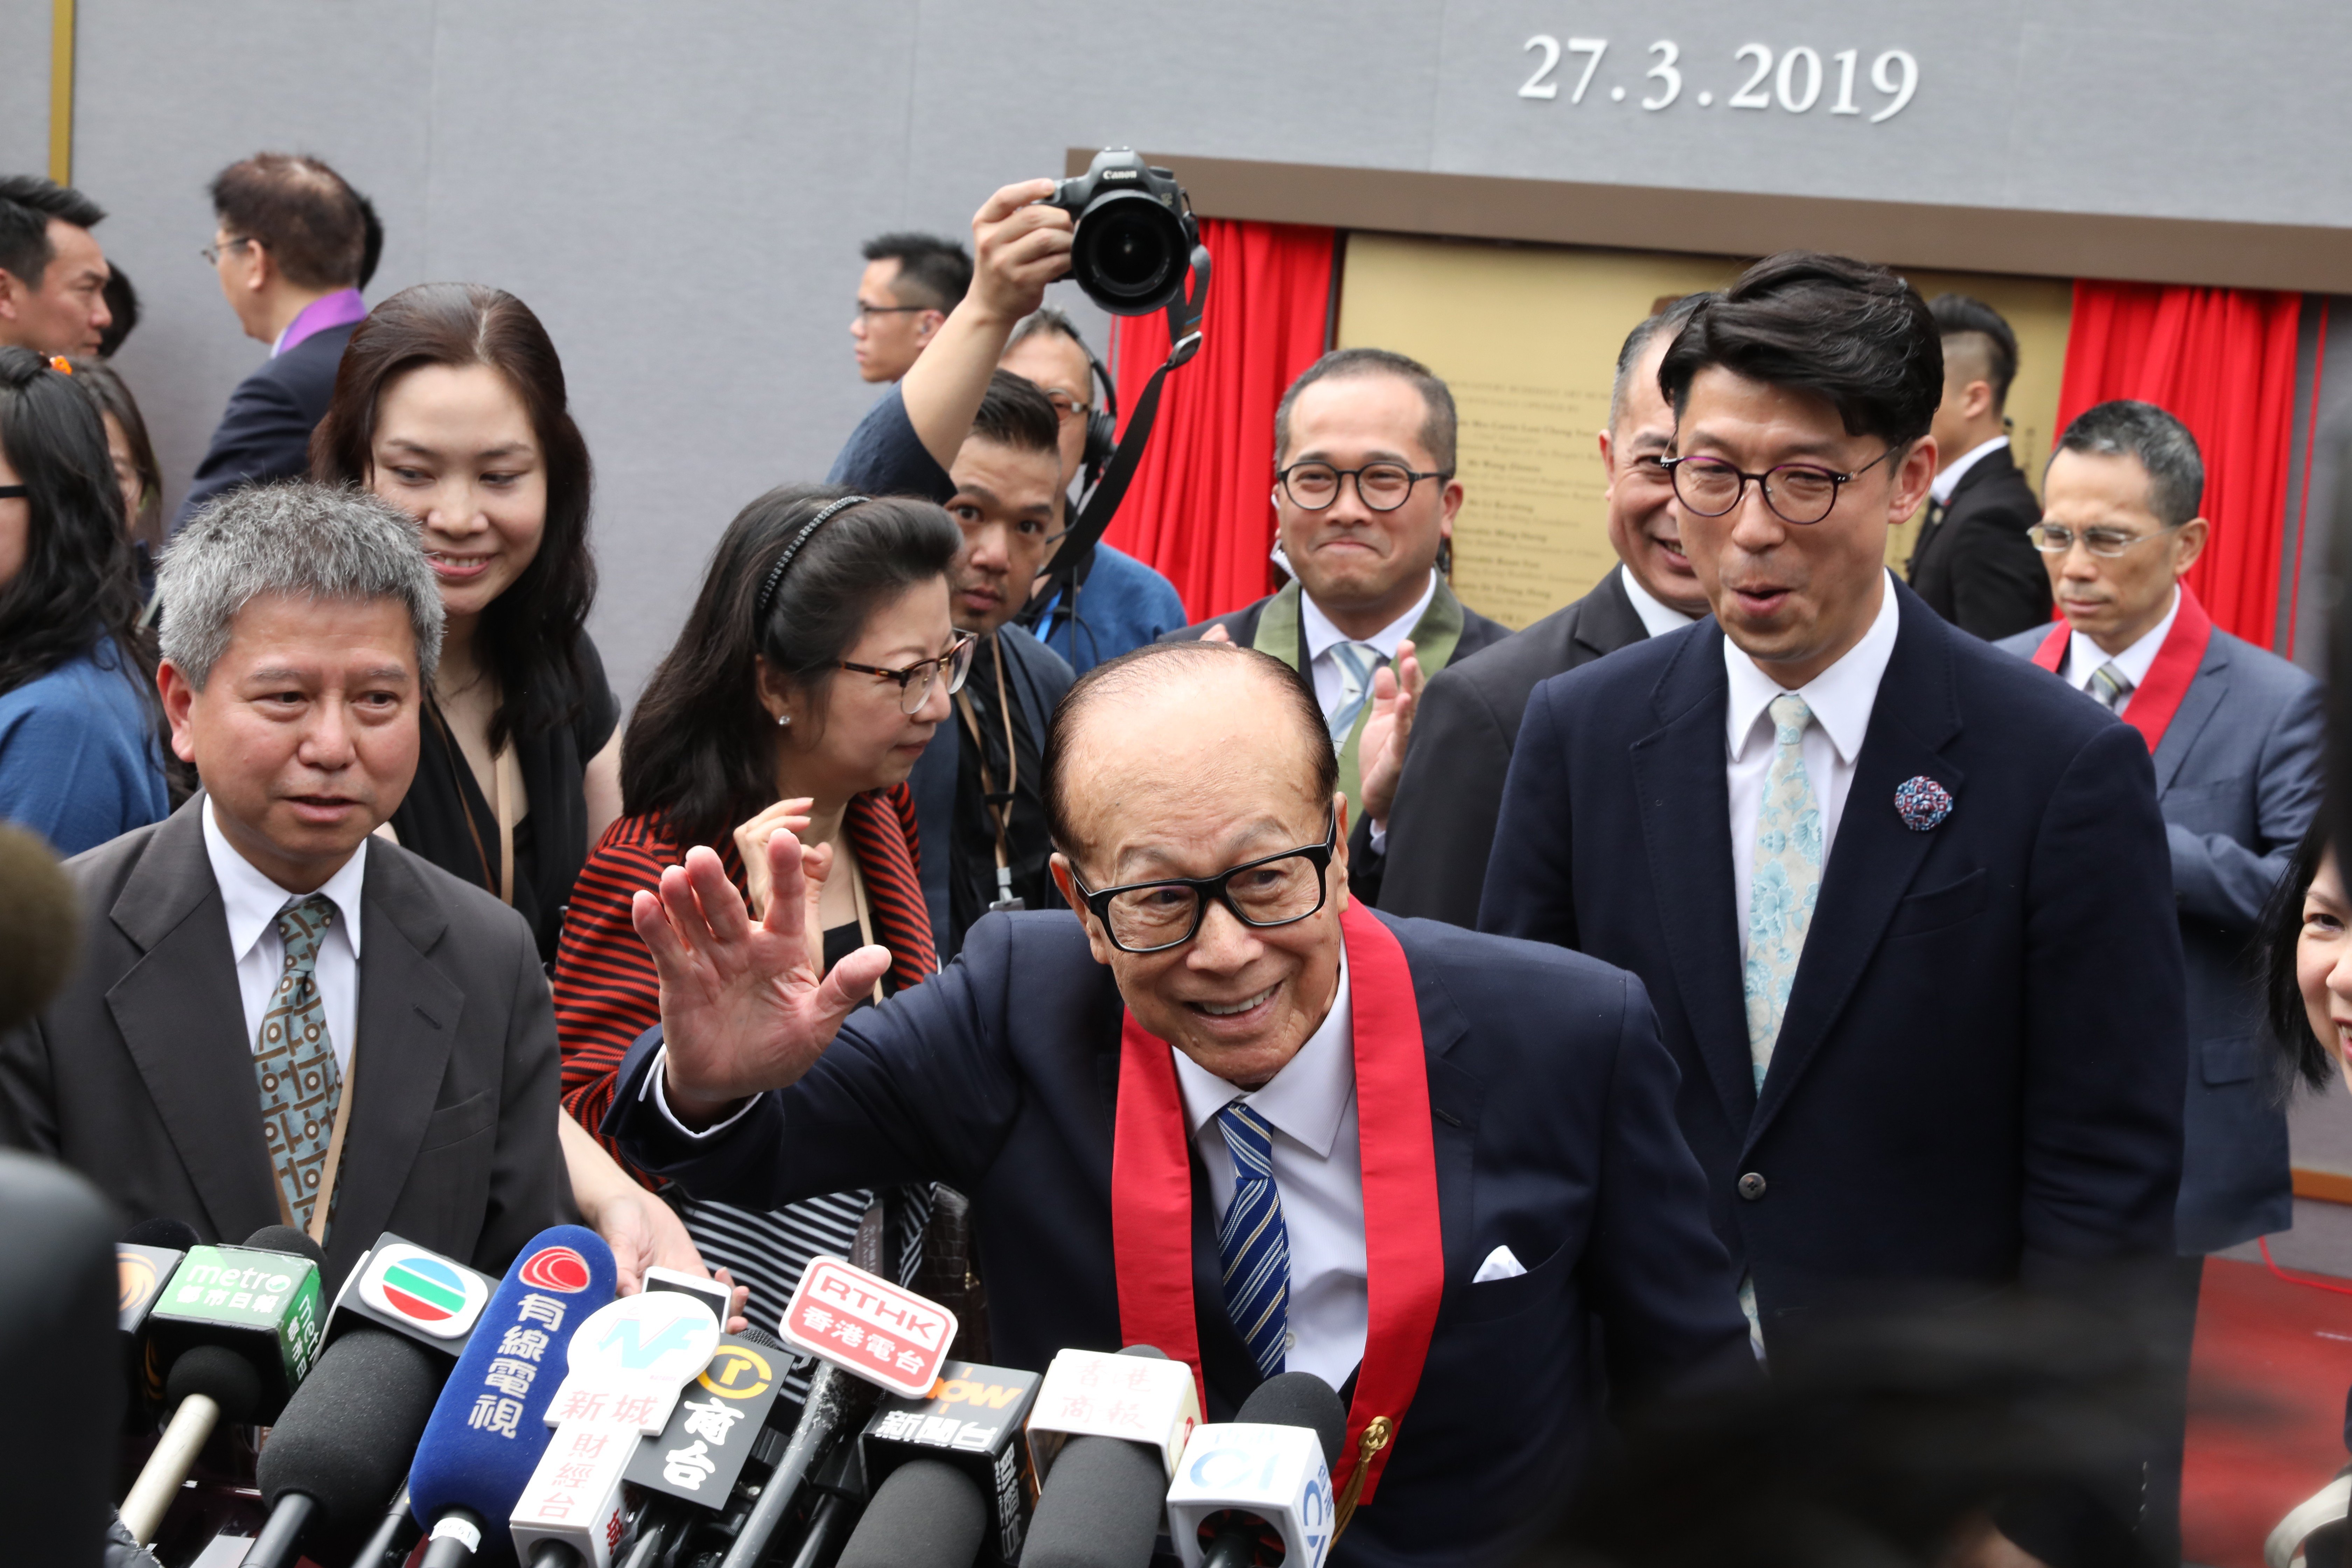 Li Ka-shing was quoted as saying that “the road to hell is often paved with good intentions”. Photo: Nora Tam